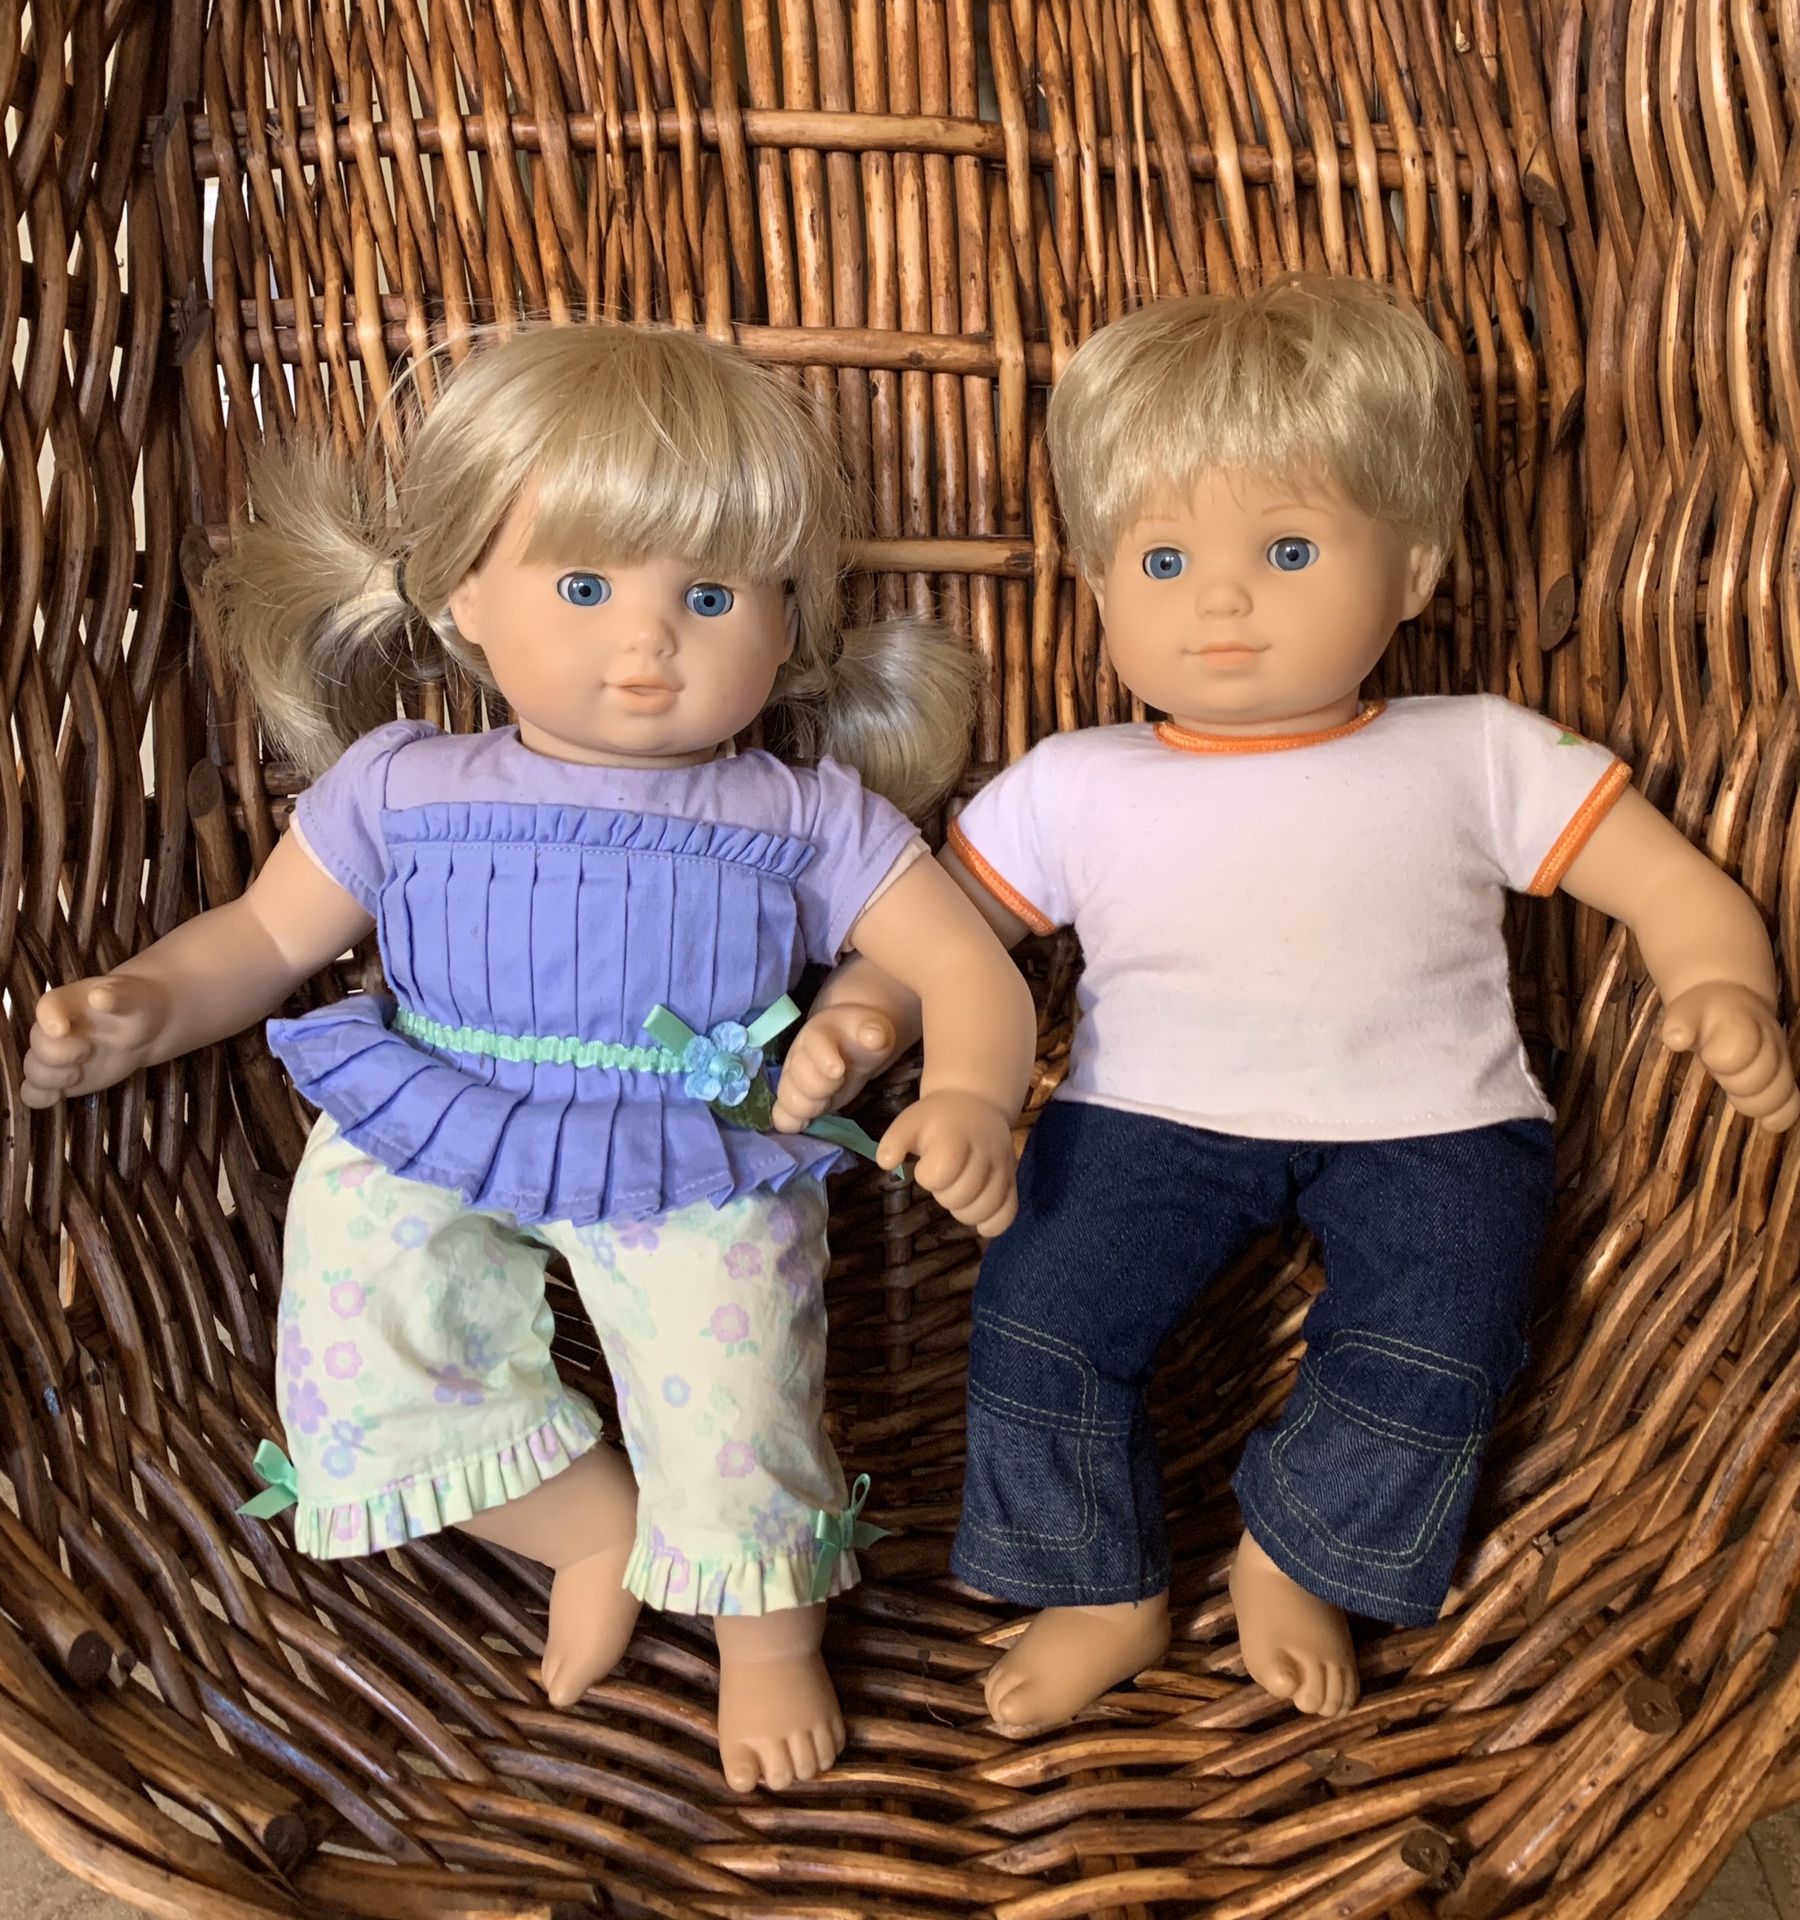 American Girl Bitty Twins Dolls - Blond Boy and Girl with outfits